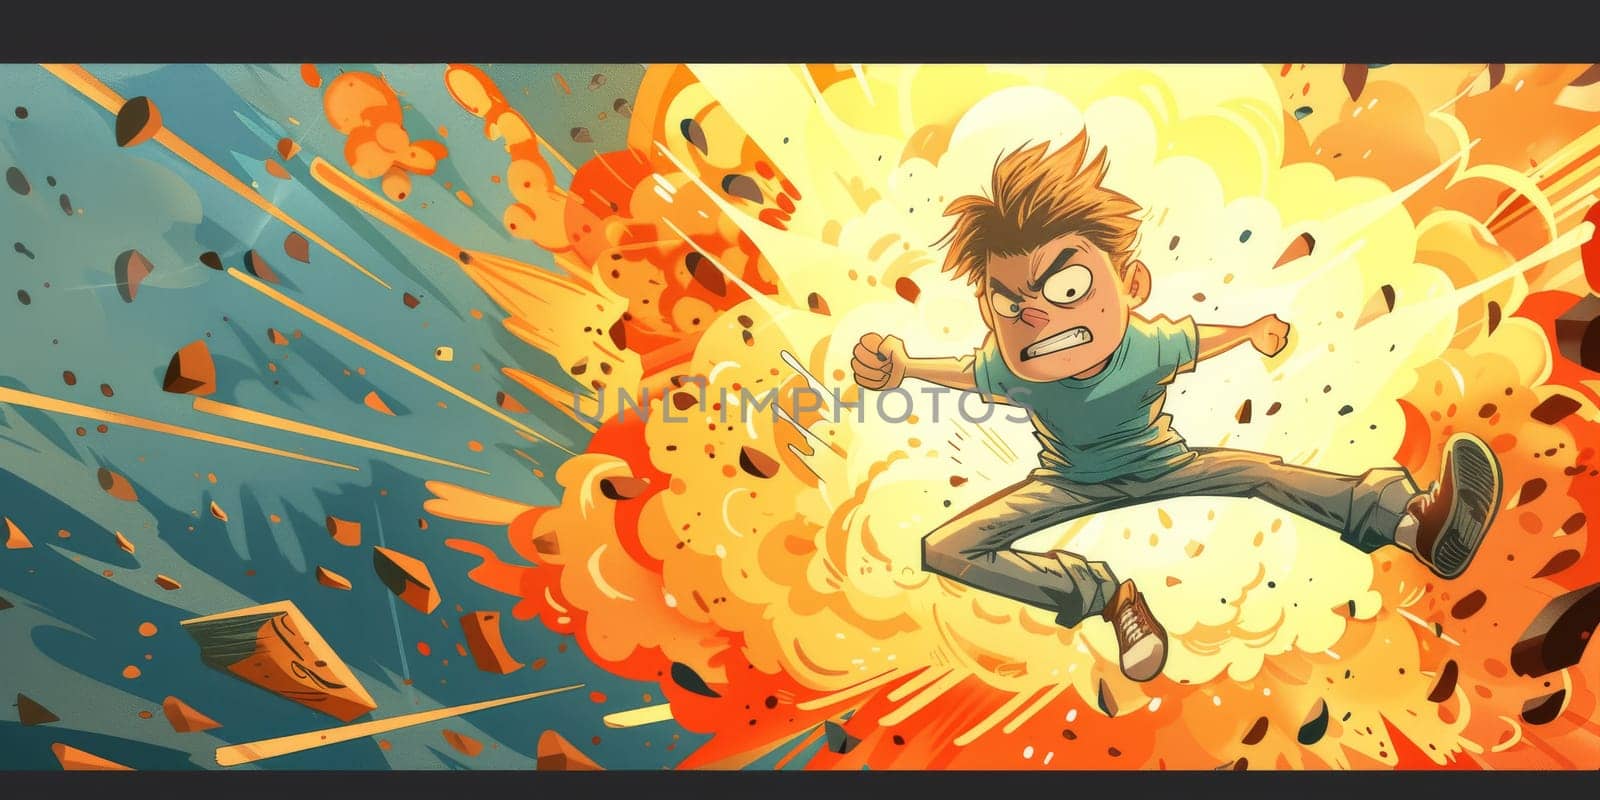 Unstoppable kid with explosion effect on the background by Kadula